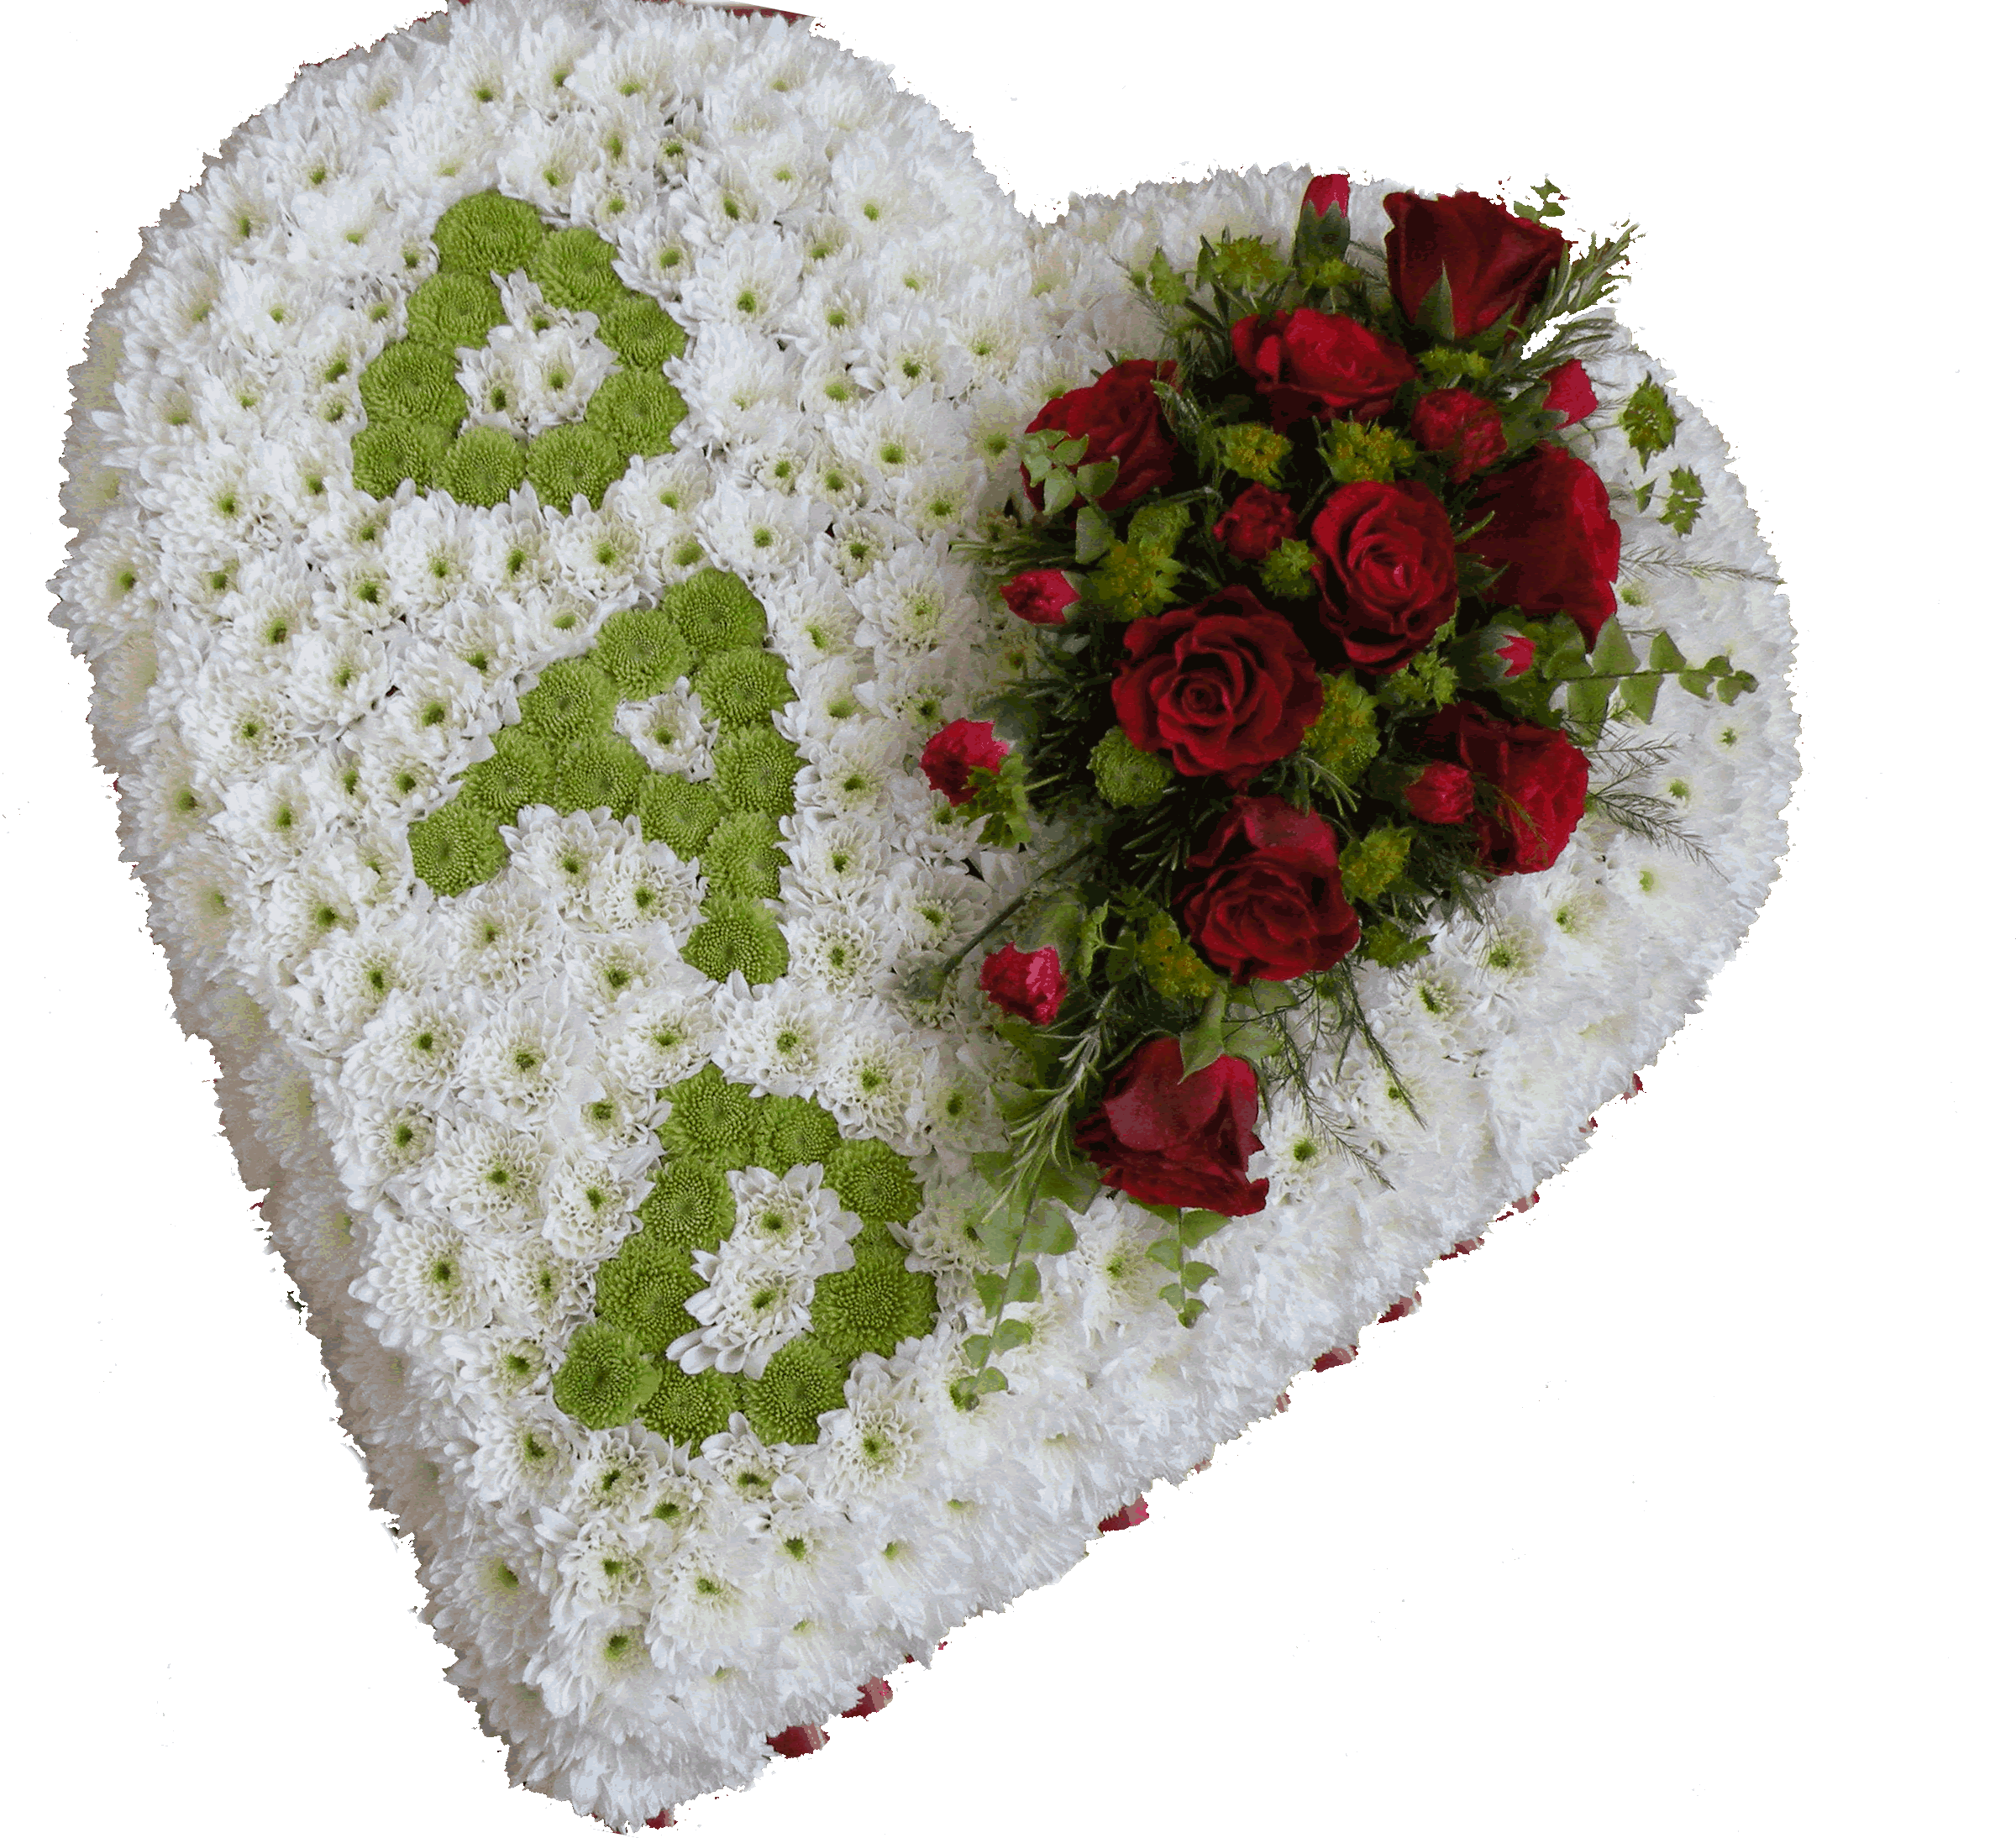 funeral flowers for beautiful fitting tributes wreaths and flowers ...